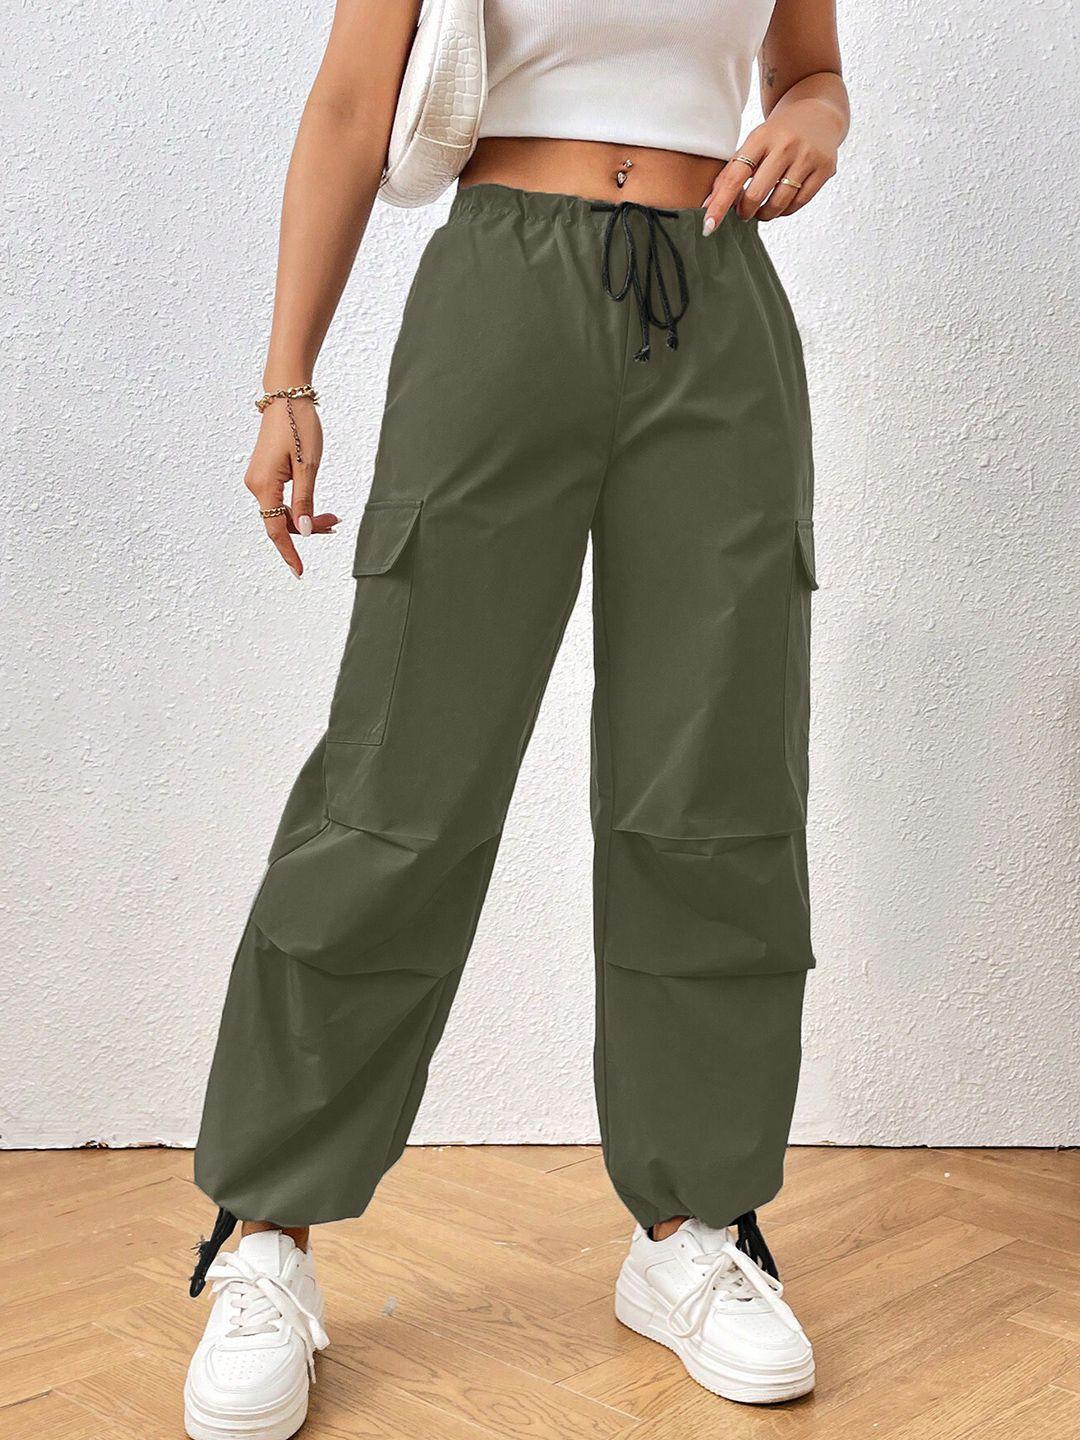 AAHWAN Women Loose Fit High Rise Drawstring Cotton Cargos Trousers